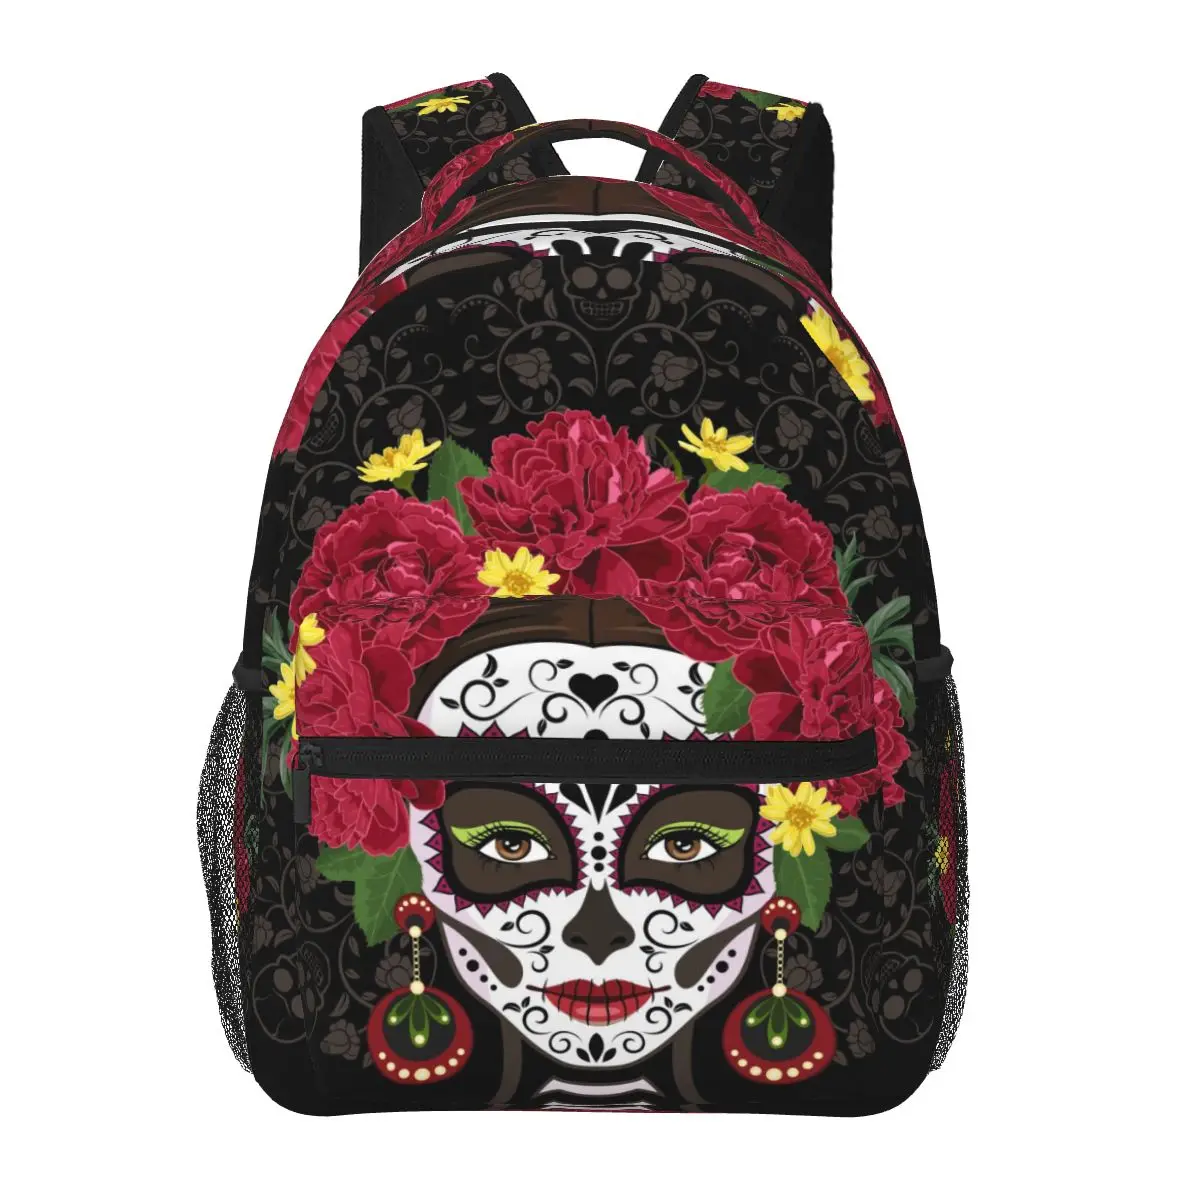 

Women's Backpack Santa Muerte With Peonies Calavera Catrina Day Of The Dead School Bag for Men Travel Bag Casual School Backpack